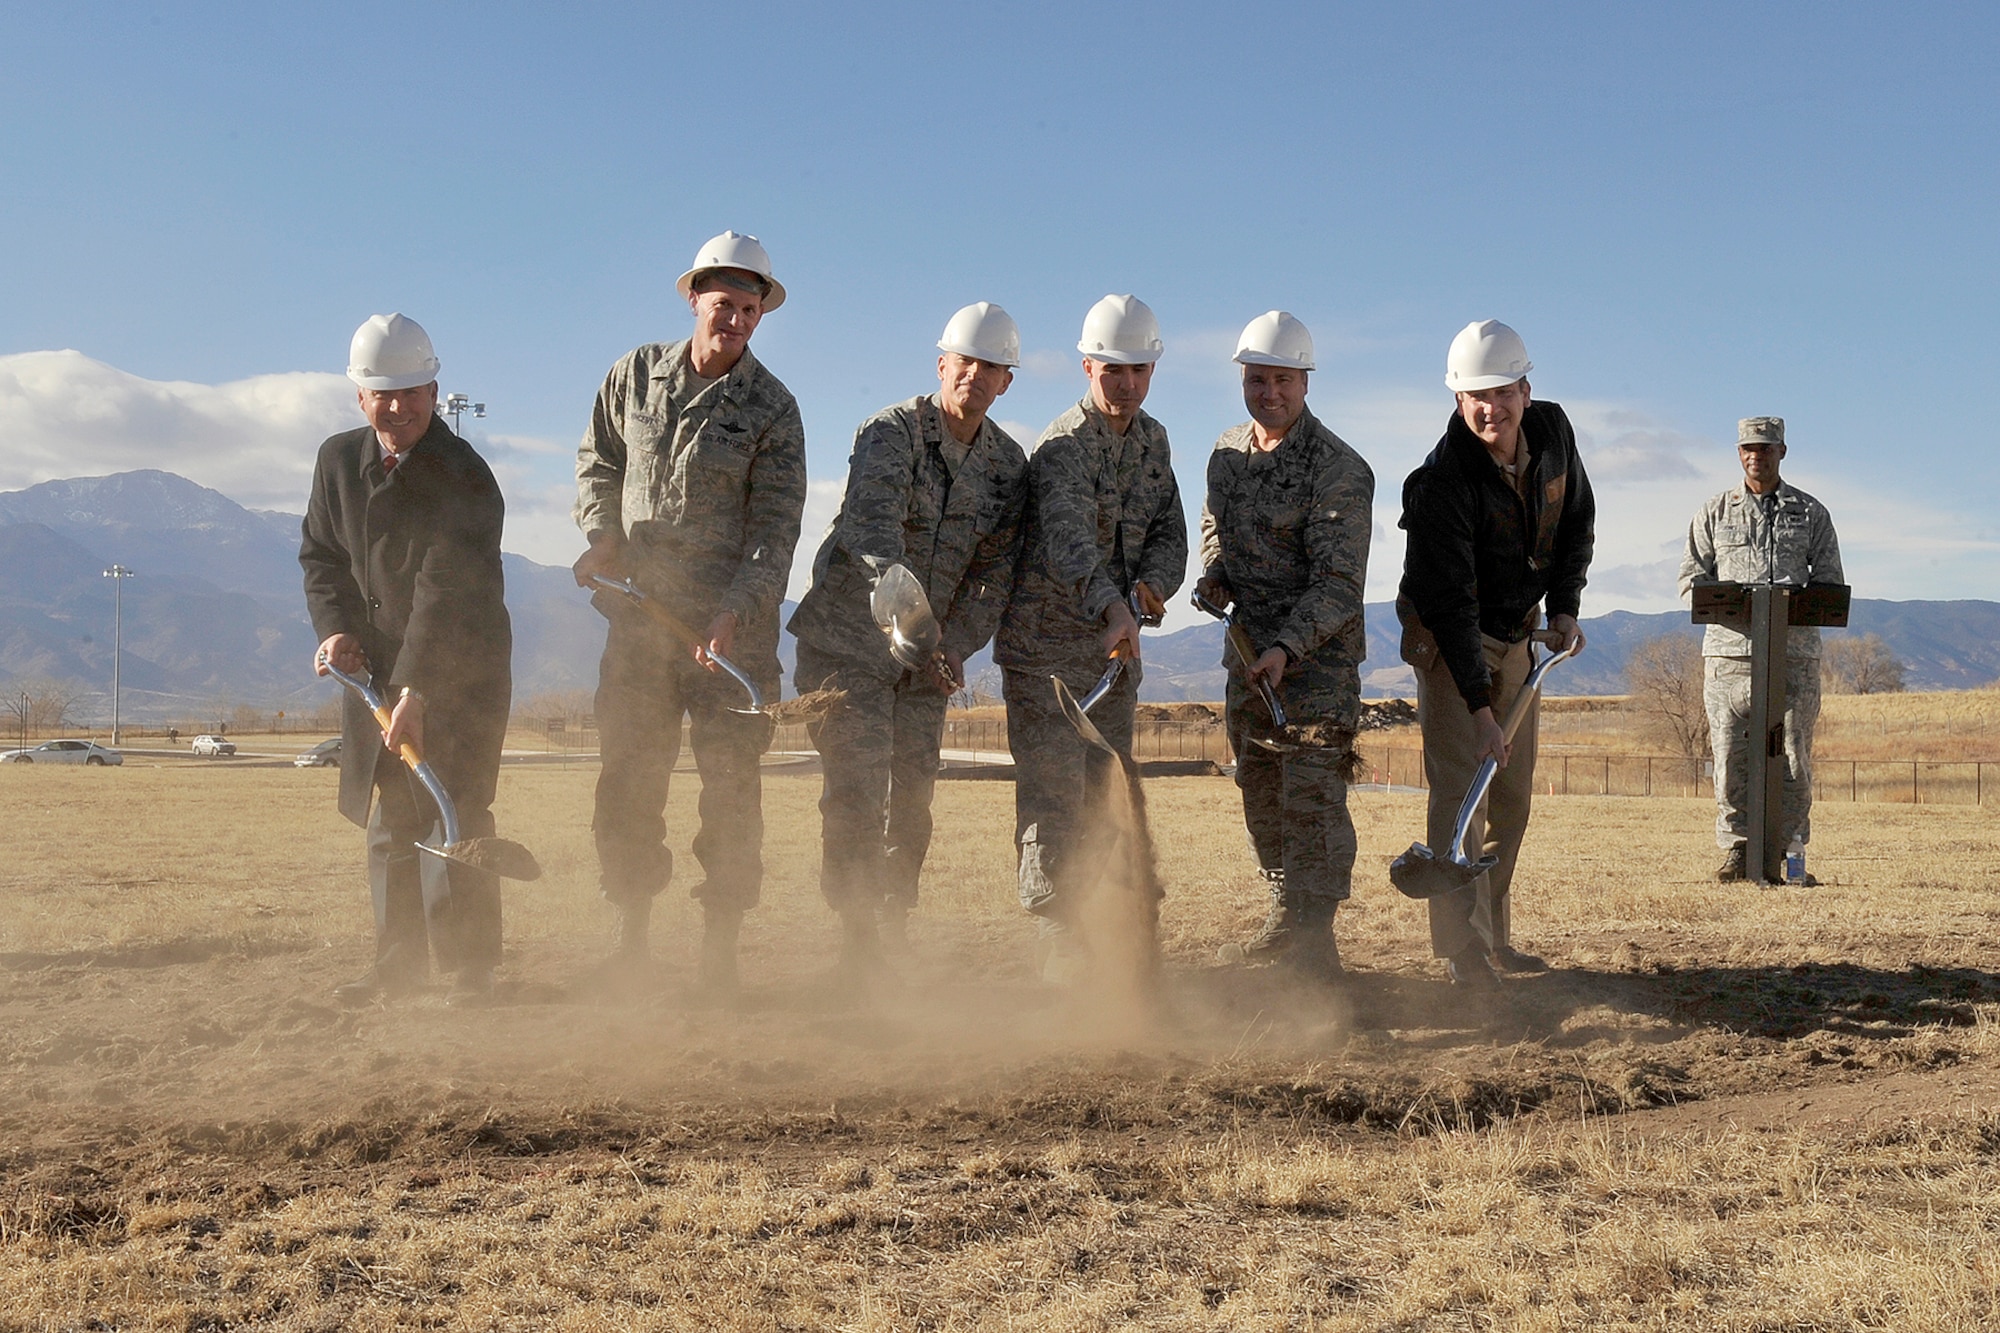 A groundbreaking was held Dec. 10 for the new Space Education and Training Center on Peterson Air Force Base. The $14.4 million facility will house the National Security Space Institute and Advanced Space Operations School. The center will be Air Force Space Command’s state-of-the-art training and education facility for space professionals. Breaking ground (left to right) are James Moschgat, associate dean of Operations, NSSI; Col. Roger Vincent, Space Innovation and Development Center commander; Maj. Gen. Michael Basla, AFSPC vice commander; Col. Stephen Whiting, 21st Space Wing commander; Col. Mark Hustedt, 310th Space Wing vice commander; and Navy Capt. Raymond Ginnetti, Navy Cyber Forces Colorado senior officer. (U.S. Air Force photo/Rob Bussard)